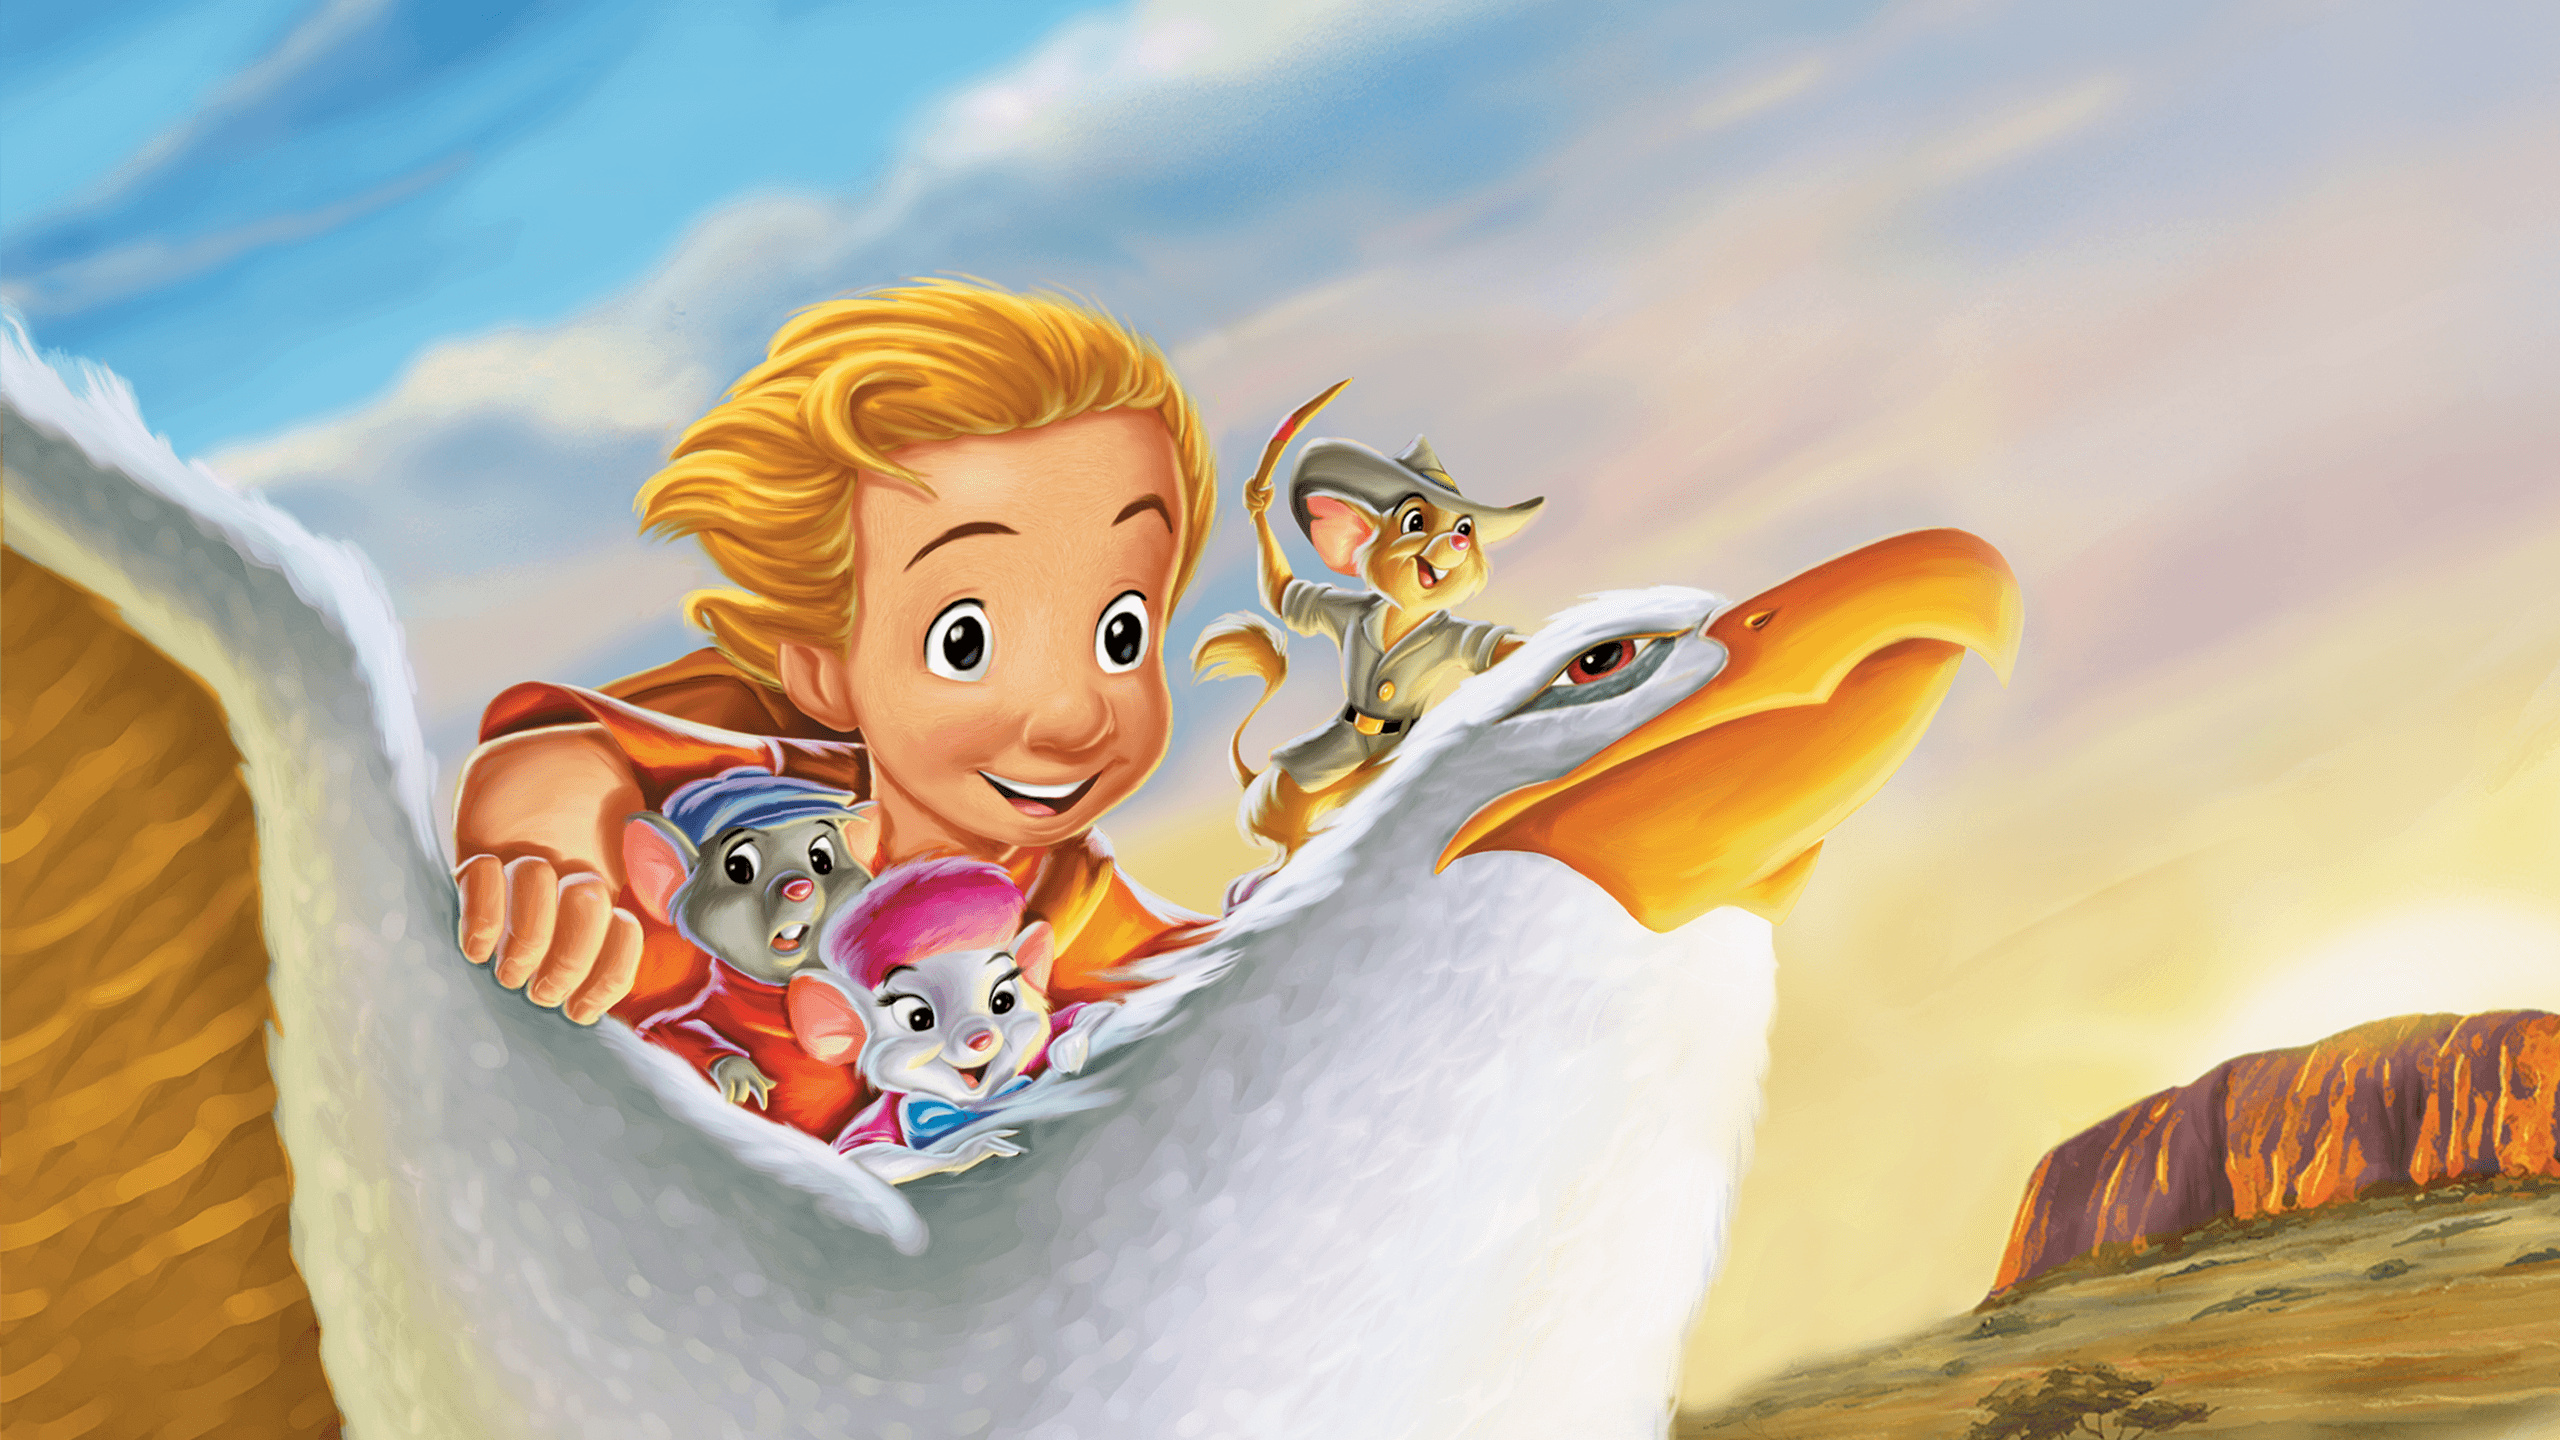 The Rescuers Down Under, Movies anywhere, Disney animation, Adventure film, 2560x1440 HD Desktop